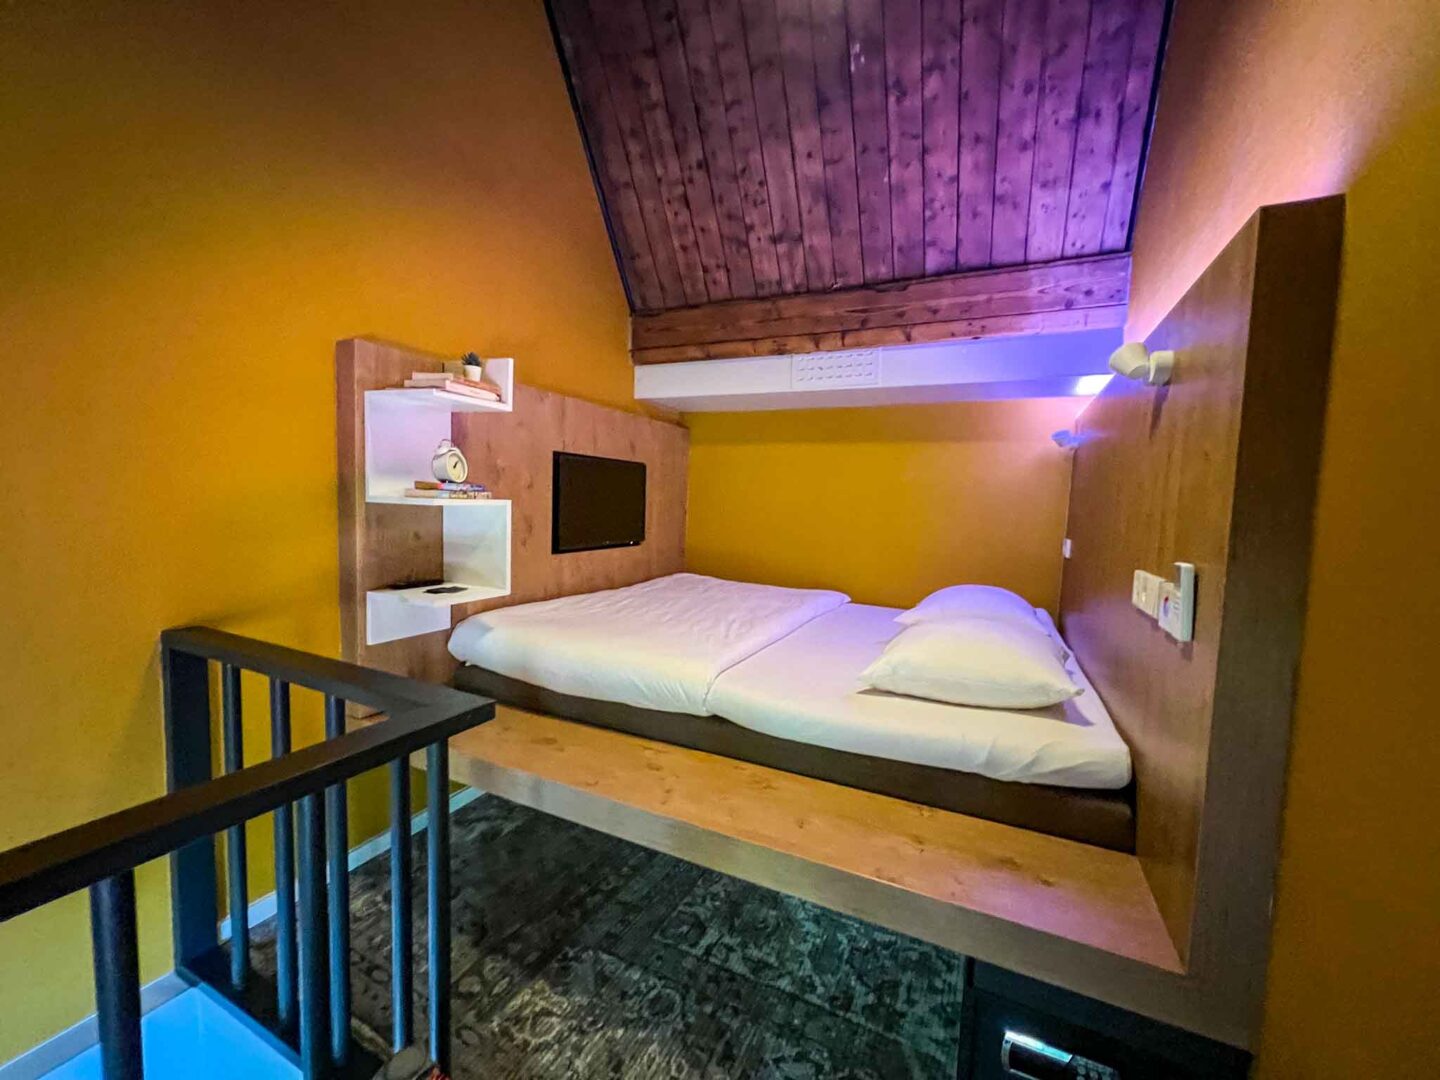 Things to do in Amsterdam Noord, Bunk hotel Amsterdam Epic + bedroom